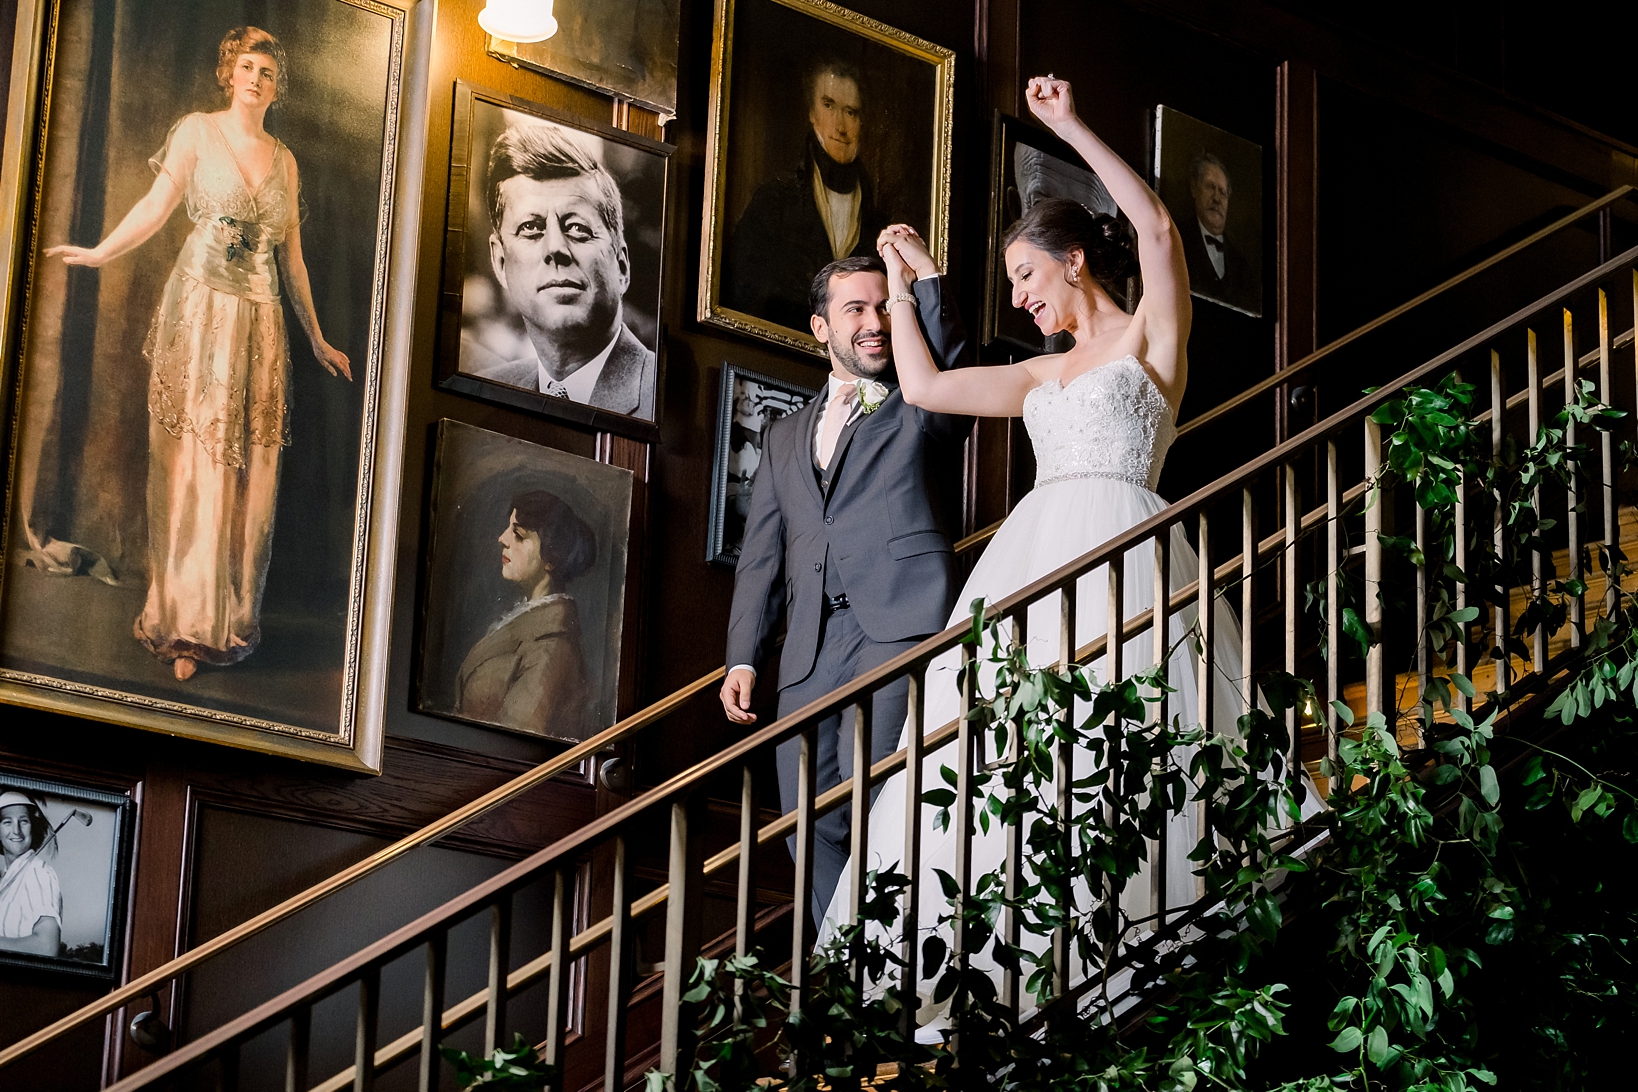 Newlyweds descend the stairs to join their guest during their reception at Oxford Exchange in Tampa, FL